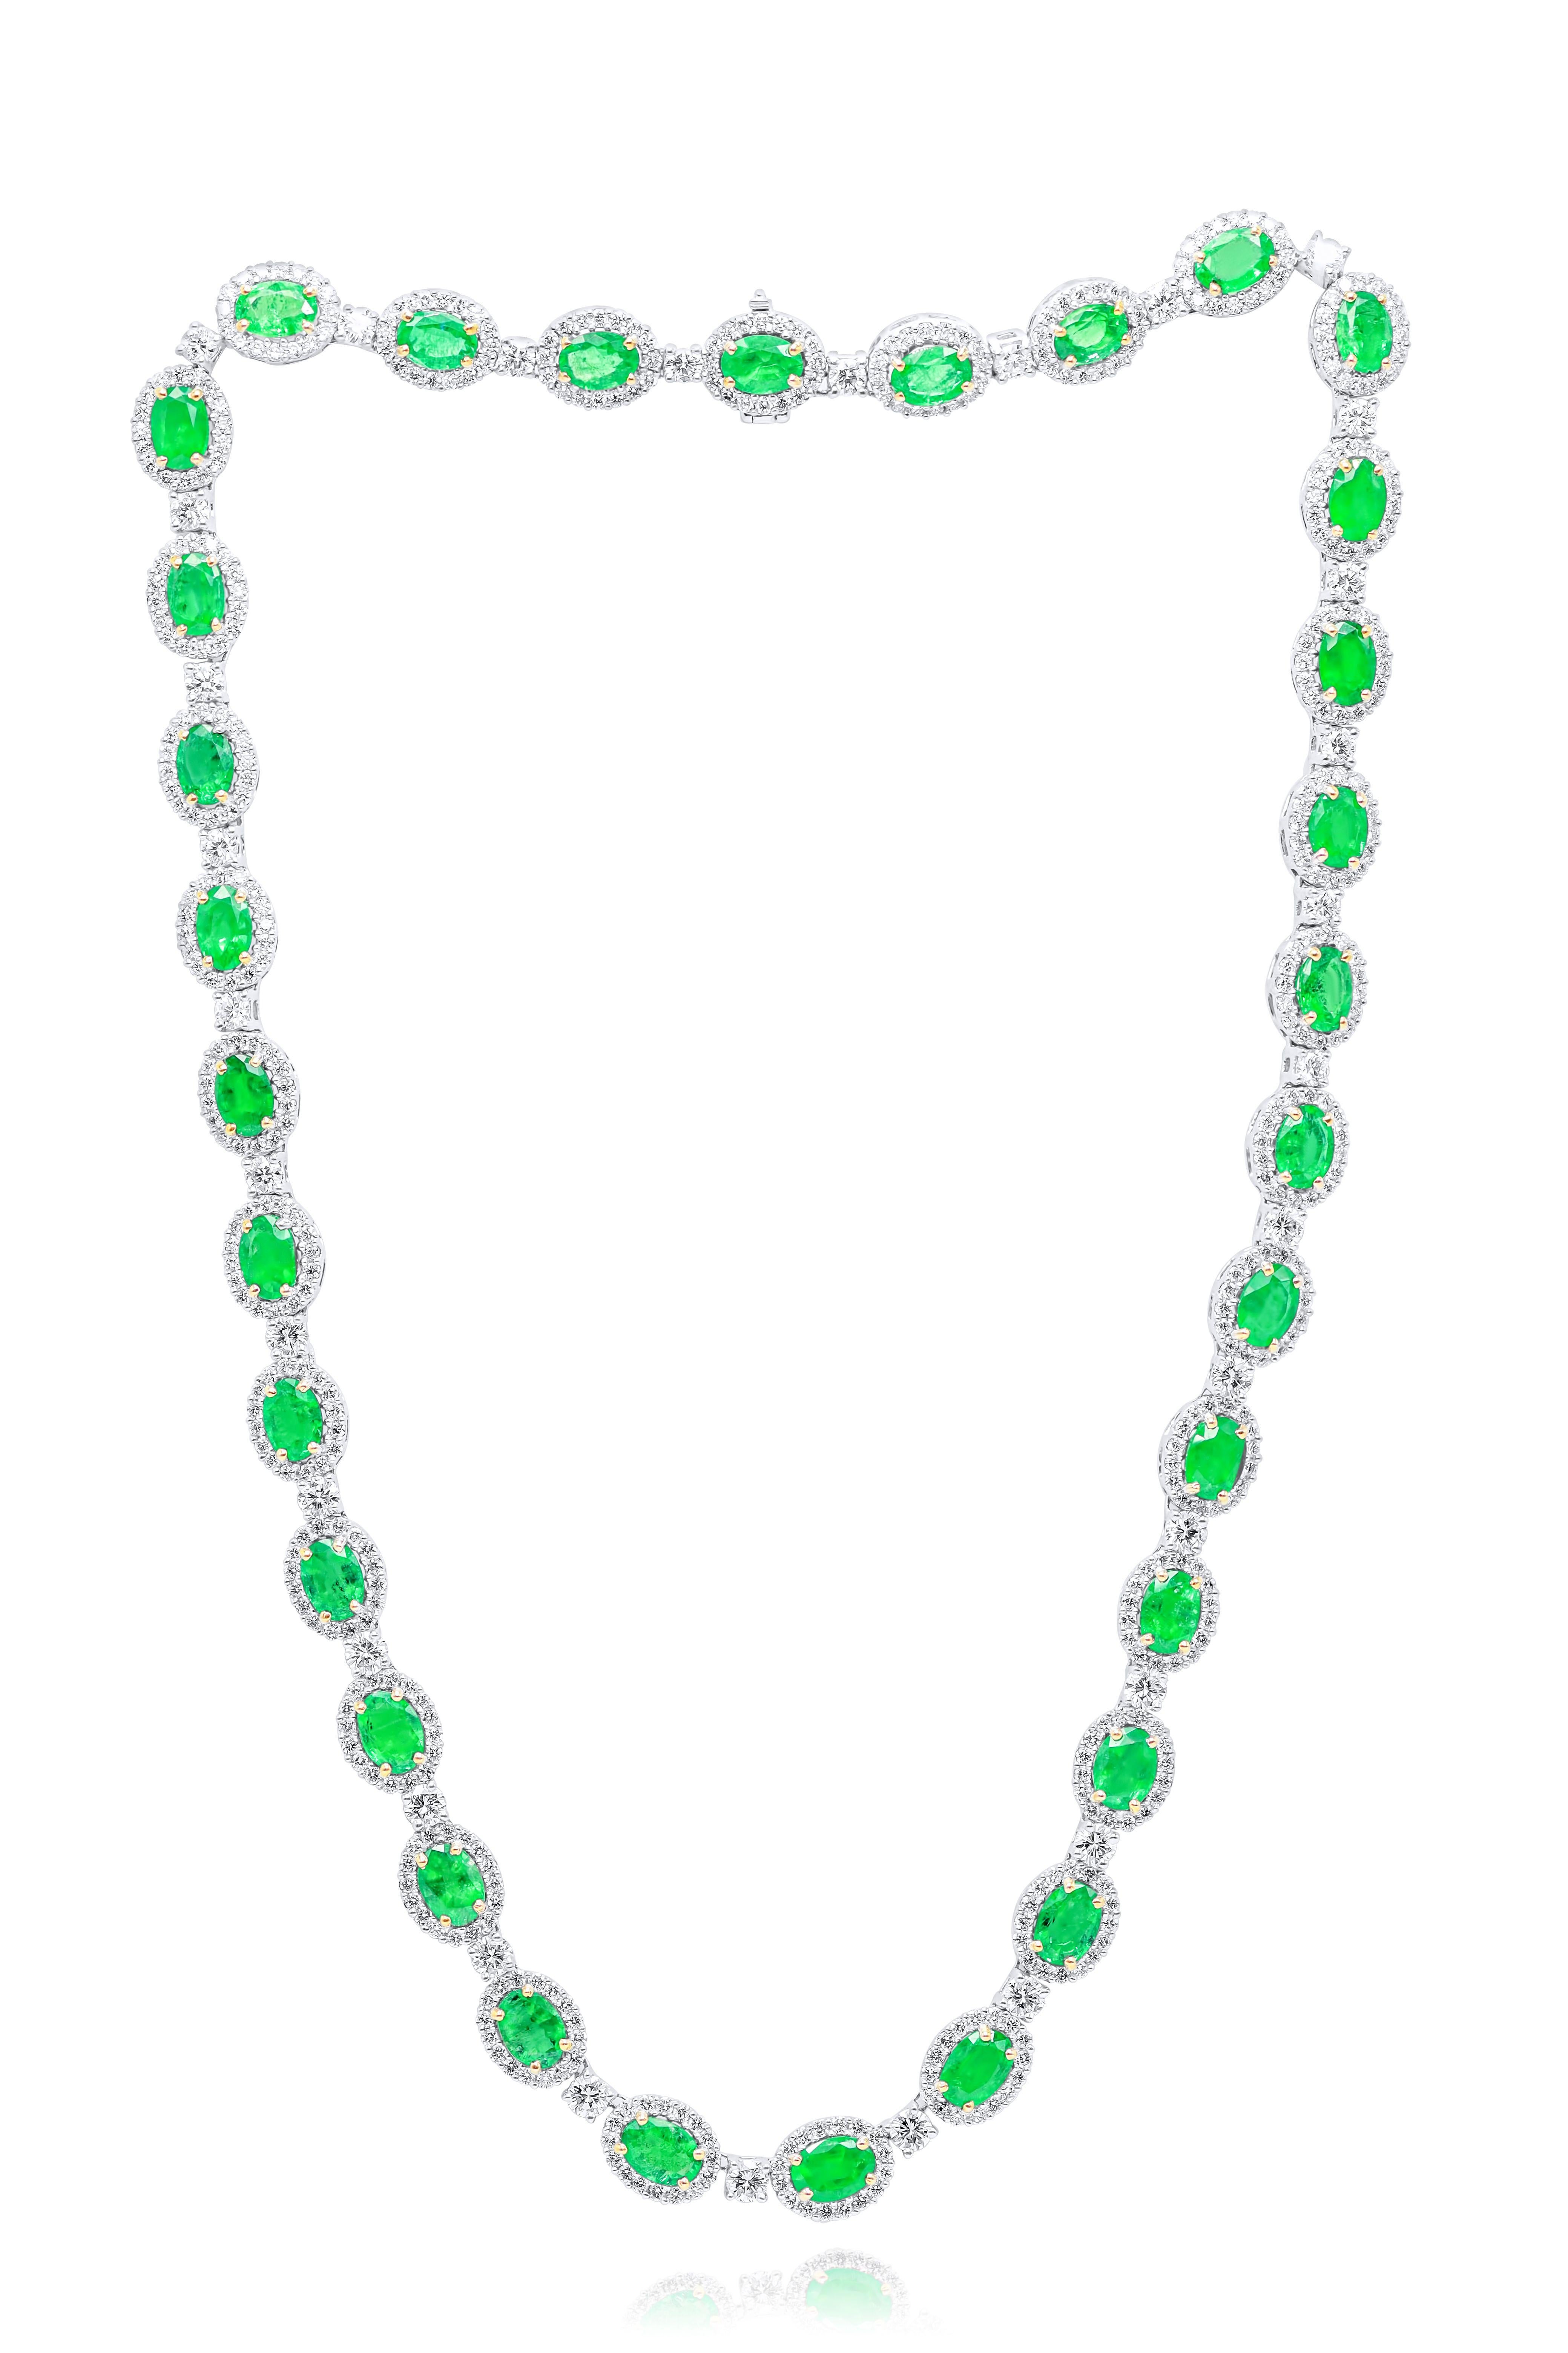 Diana M. 22.54 Carat Oval Emerald and Diamond Halo Necklace in White Gold In New Condition For Sale In New York, NY